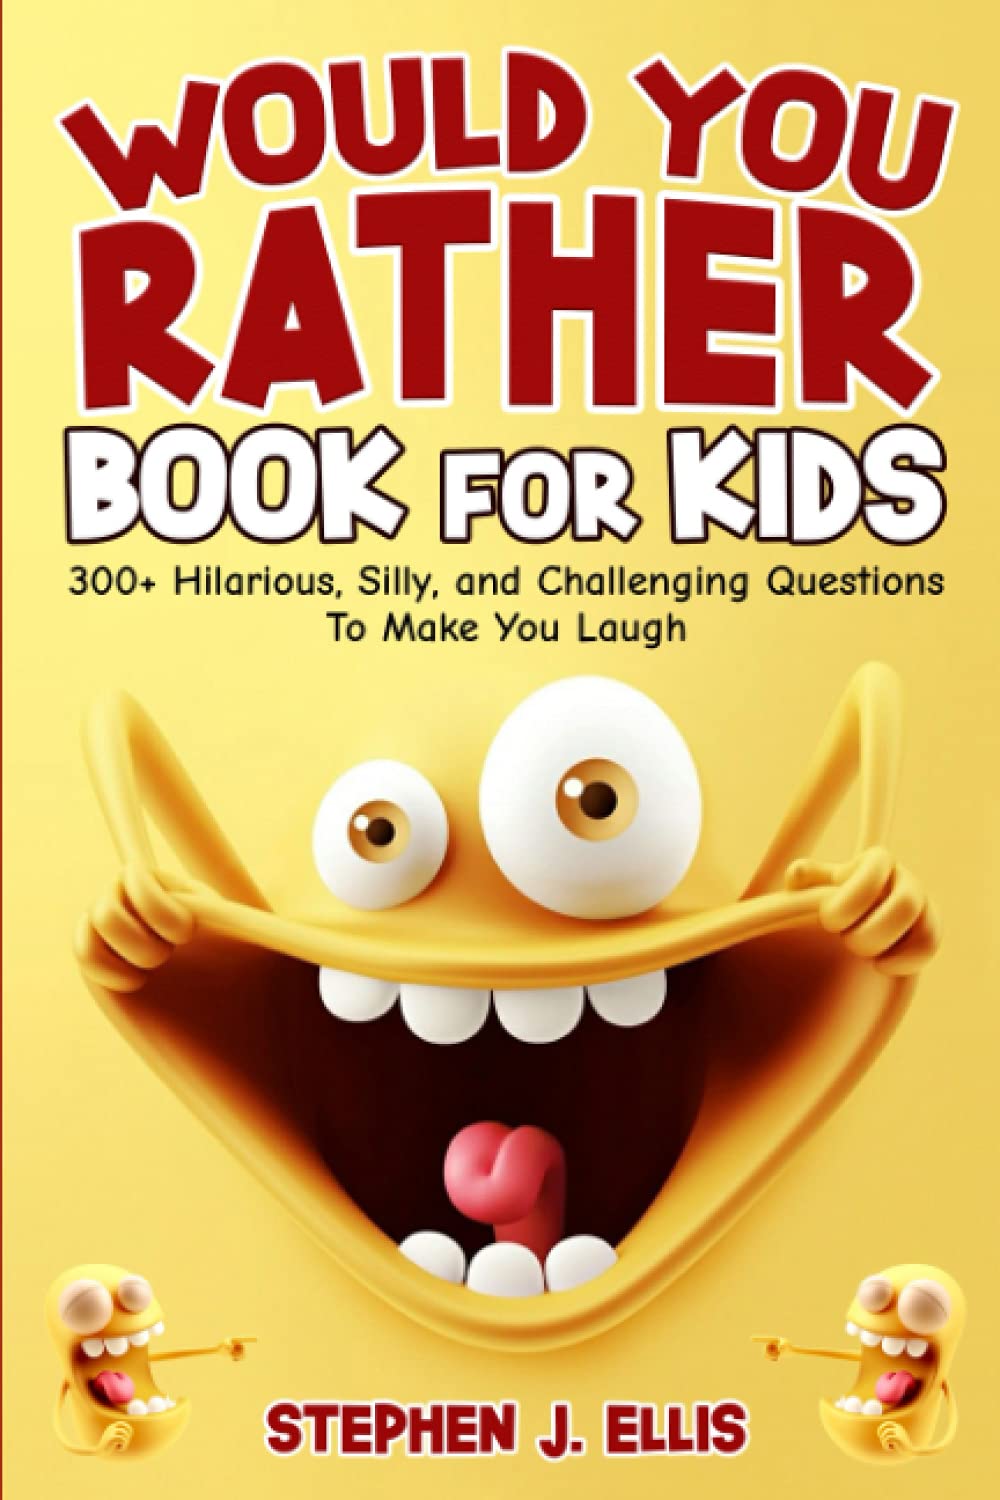 Would You Rather Book For Kids - 300+ Hilarious, Silly, and Challenging Questions To Make You Laugh (Funny Jokes and Activities - Ages 7-13)     Paperback – September 22, 2021